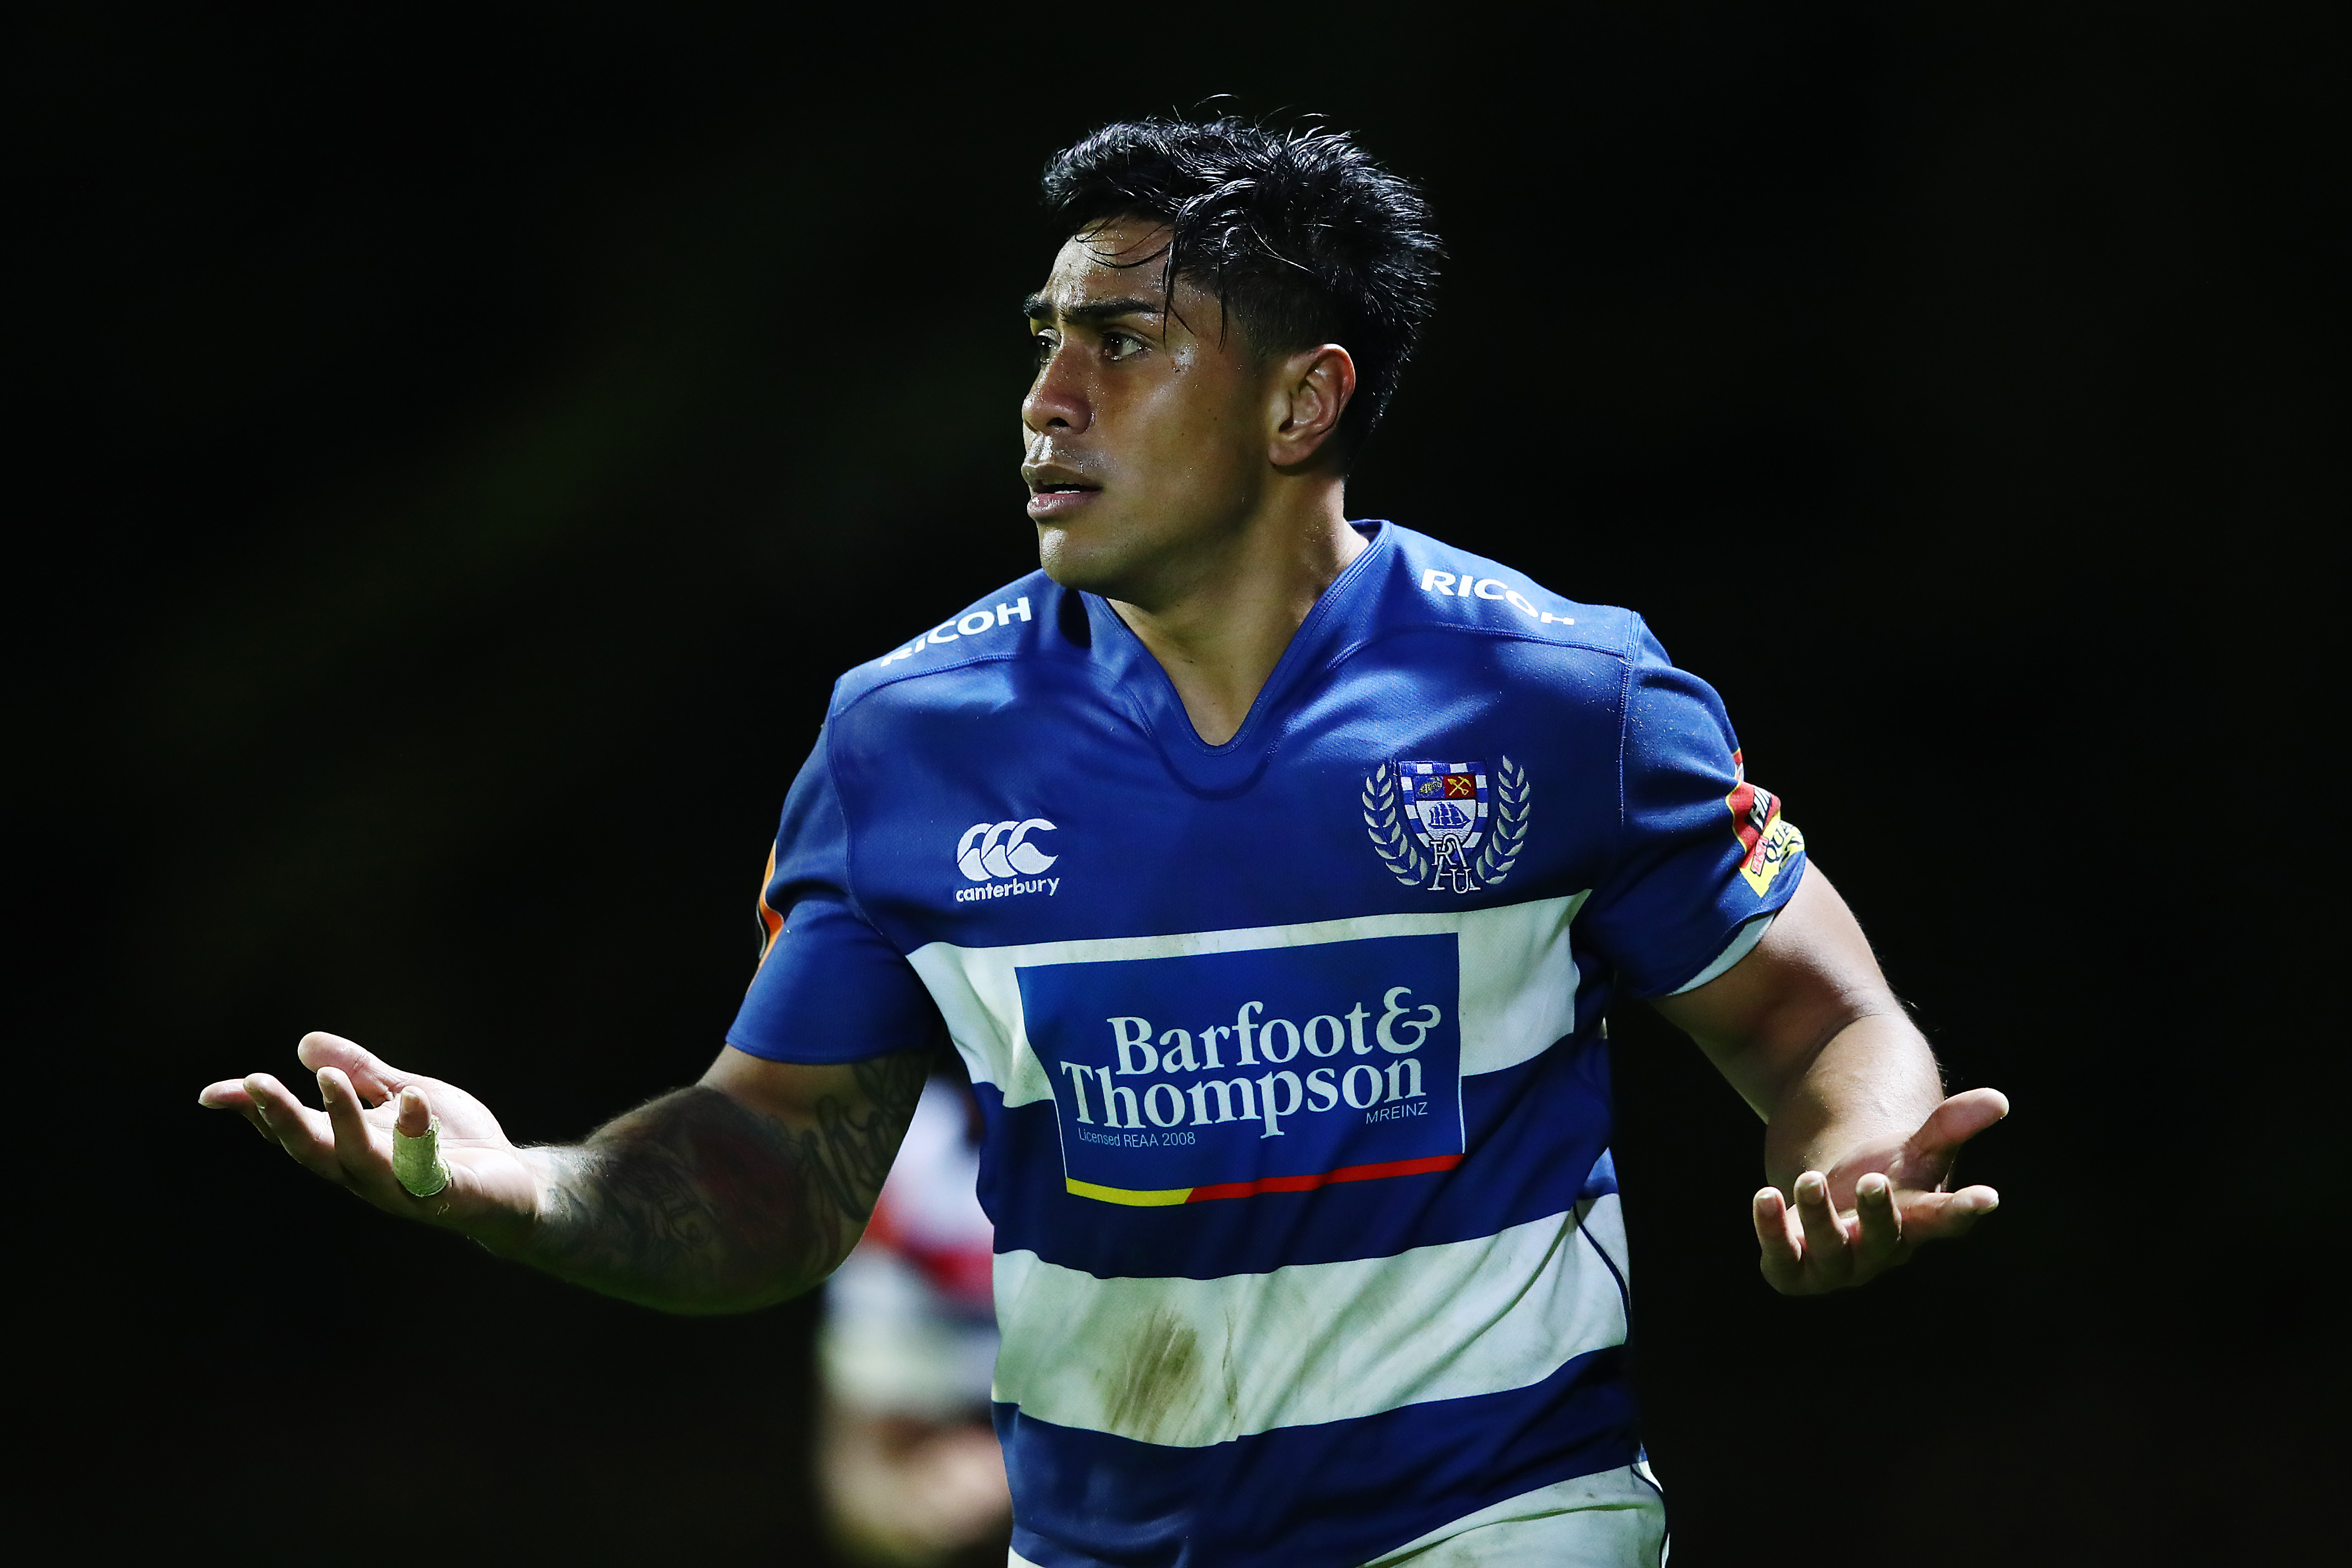 Here’s a pick of rugby player Malakai Fekitoa because I don’t have any pictures of Stephen F. Austin DL John Franklin-Myers